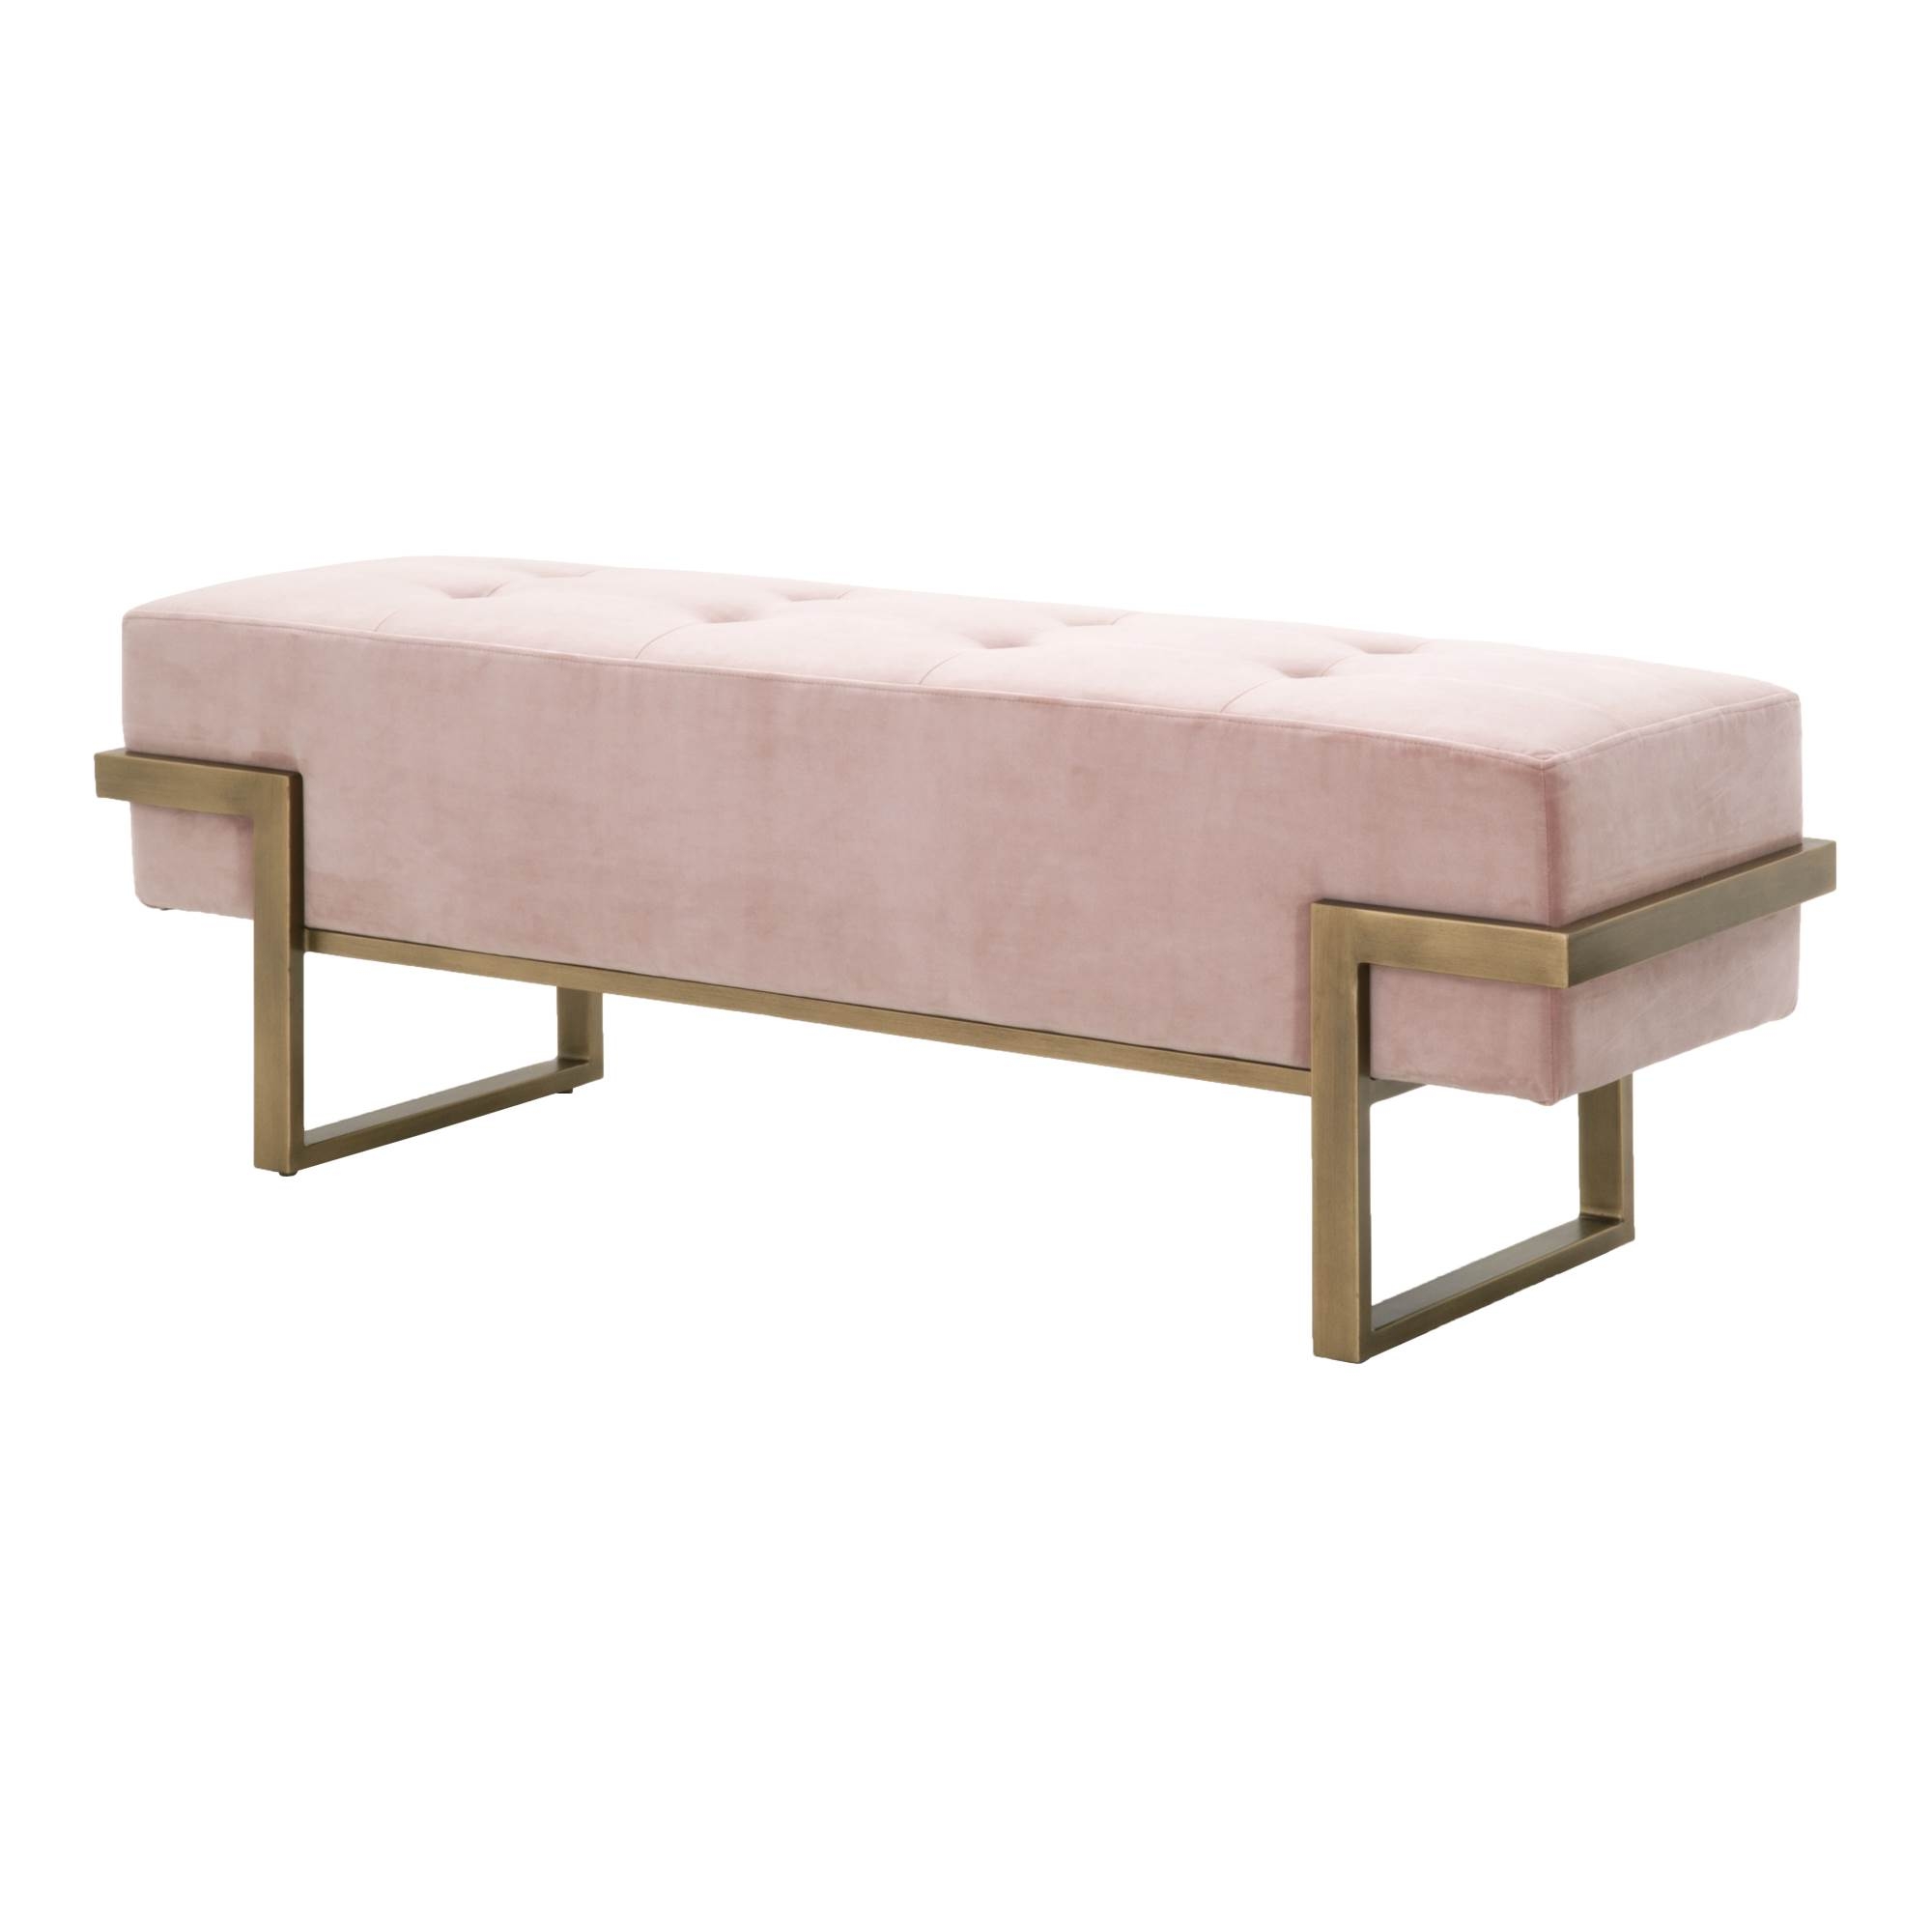 Fiona Upholstered Bench - Image 1